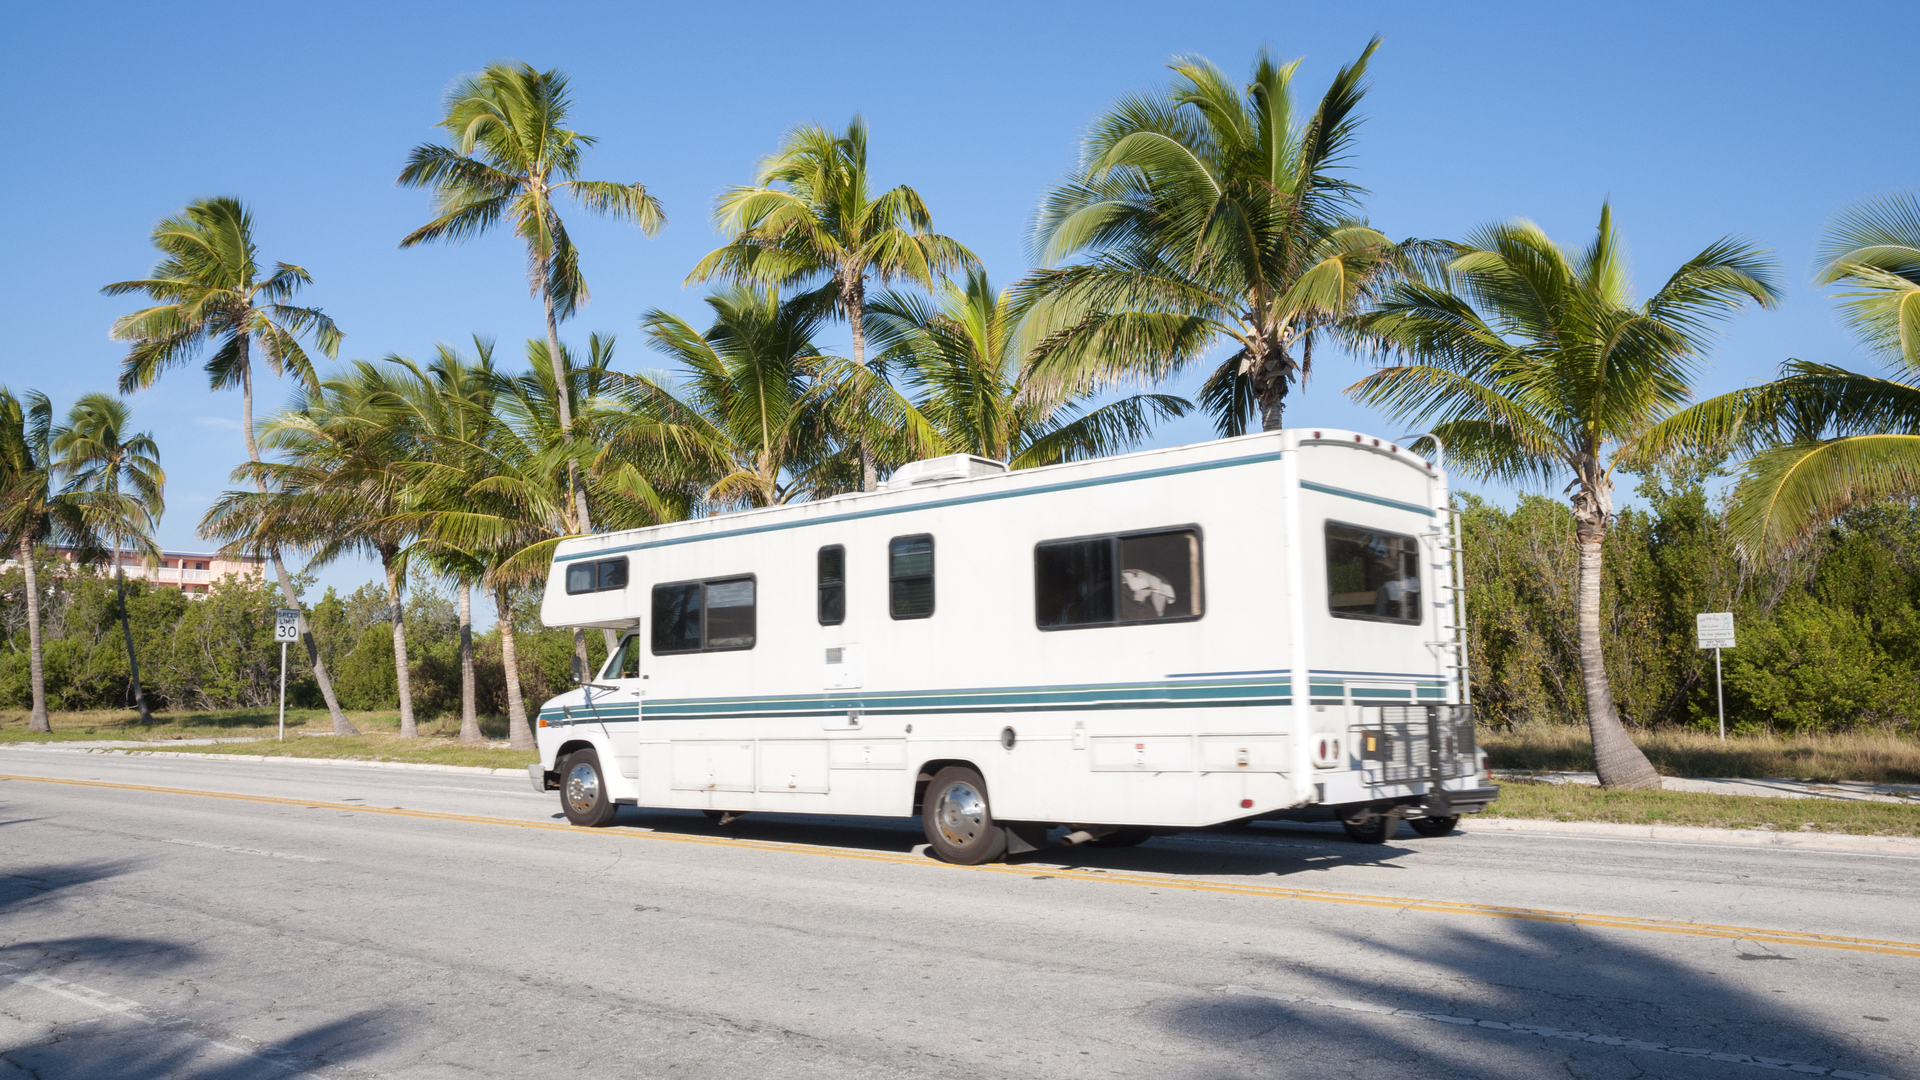 amazon, rv retirement in florida: a cheaper alternative to housing? let’s take a look